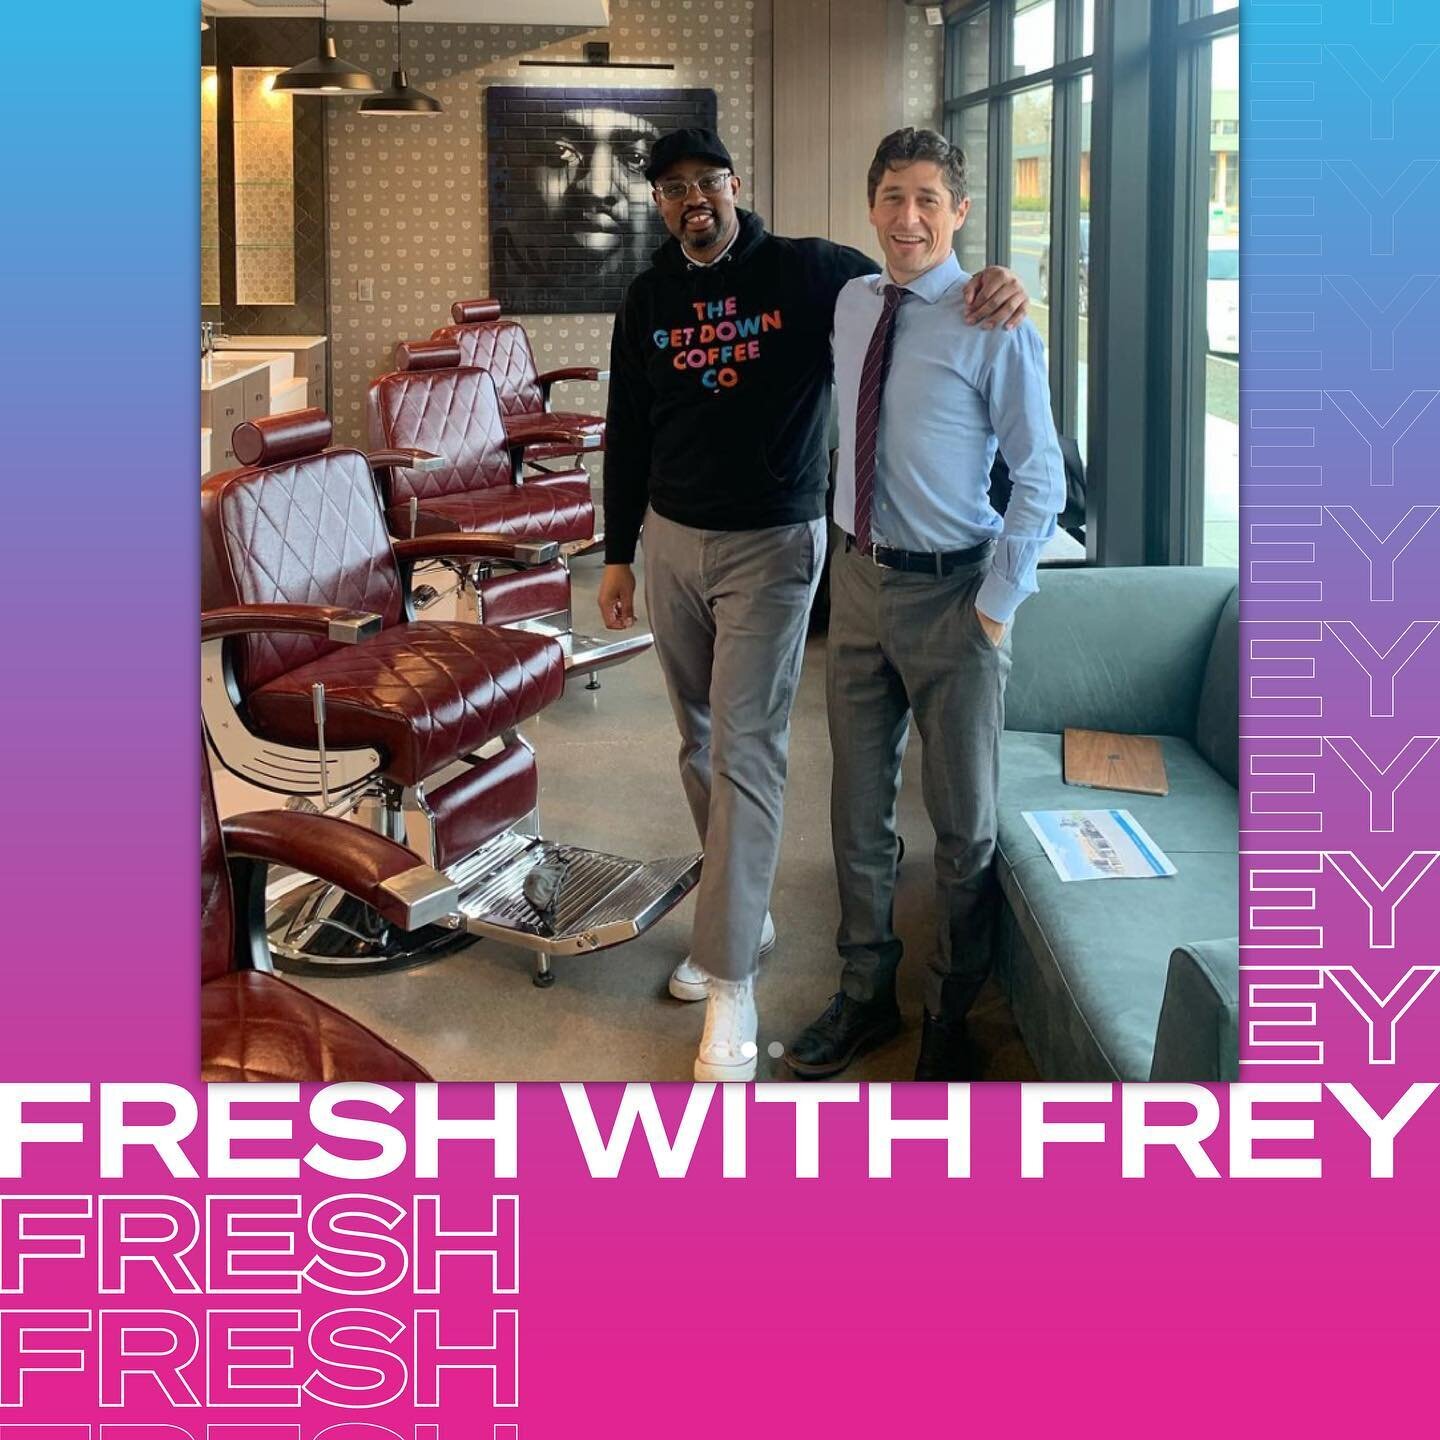 Yo! Always appreciate the support of all things FRESH especially from community partner and leader Minneapolis Mayor Jacob Frey!